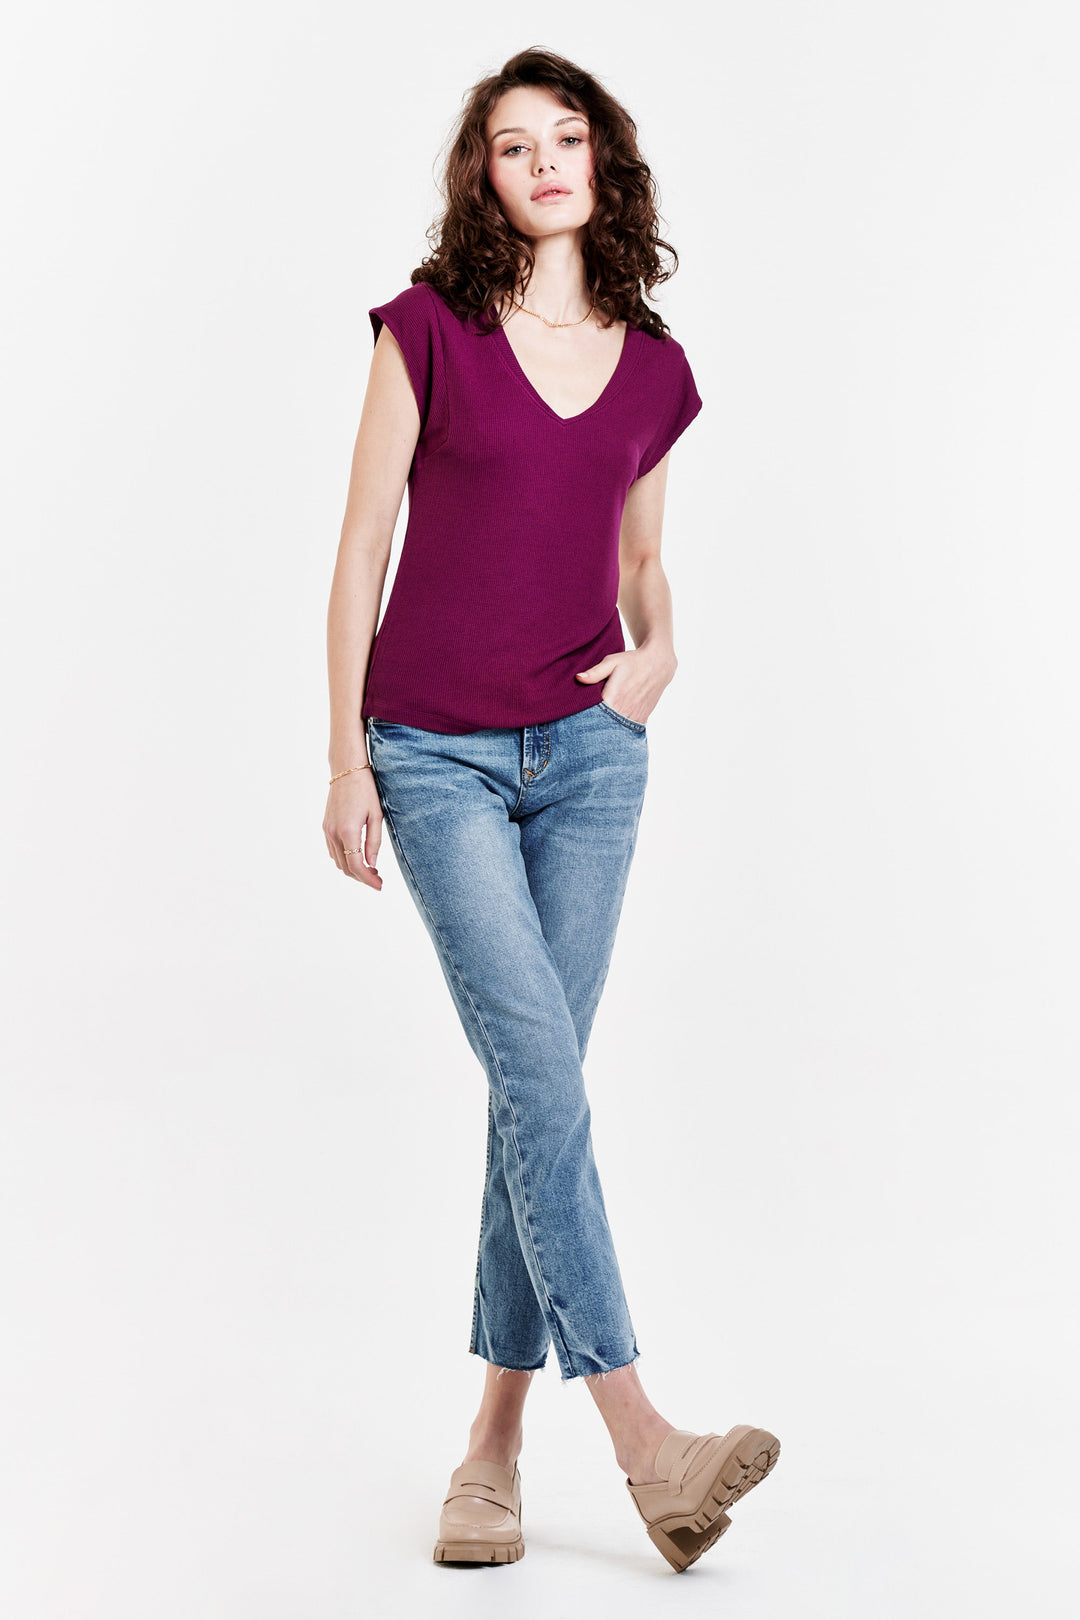 image of a female model wearing a URI THERMAL V-NECK TOP PURPLE POTION TOPS